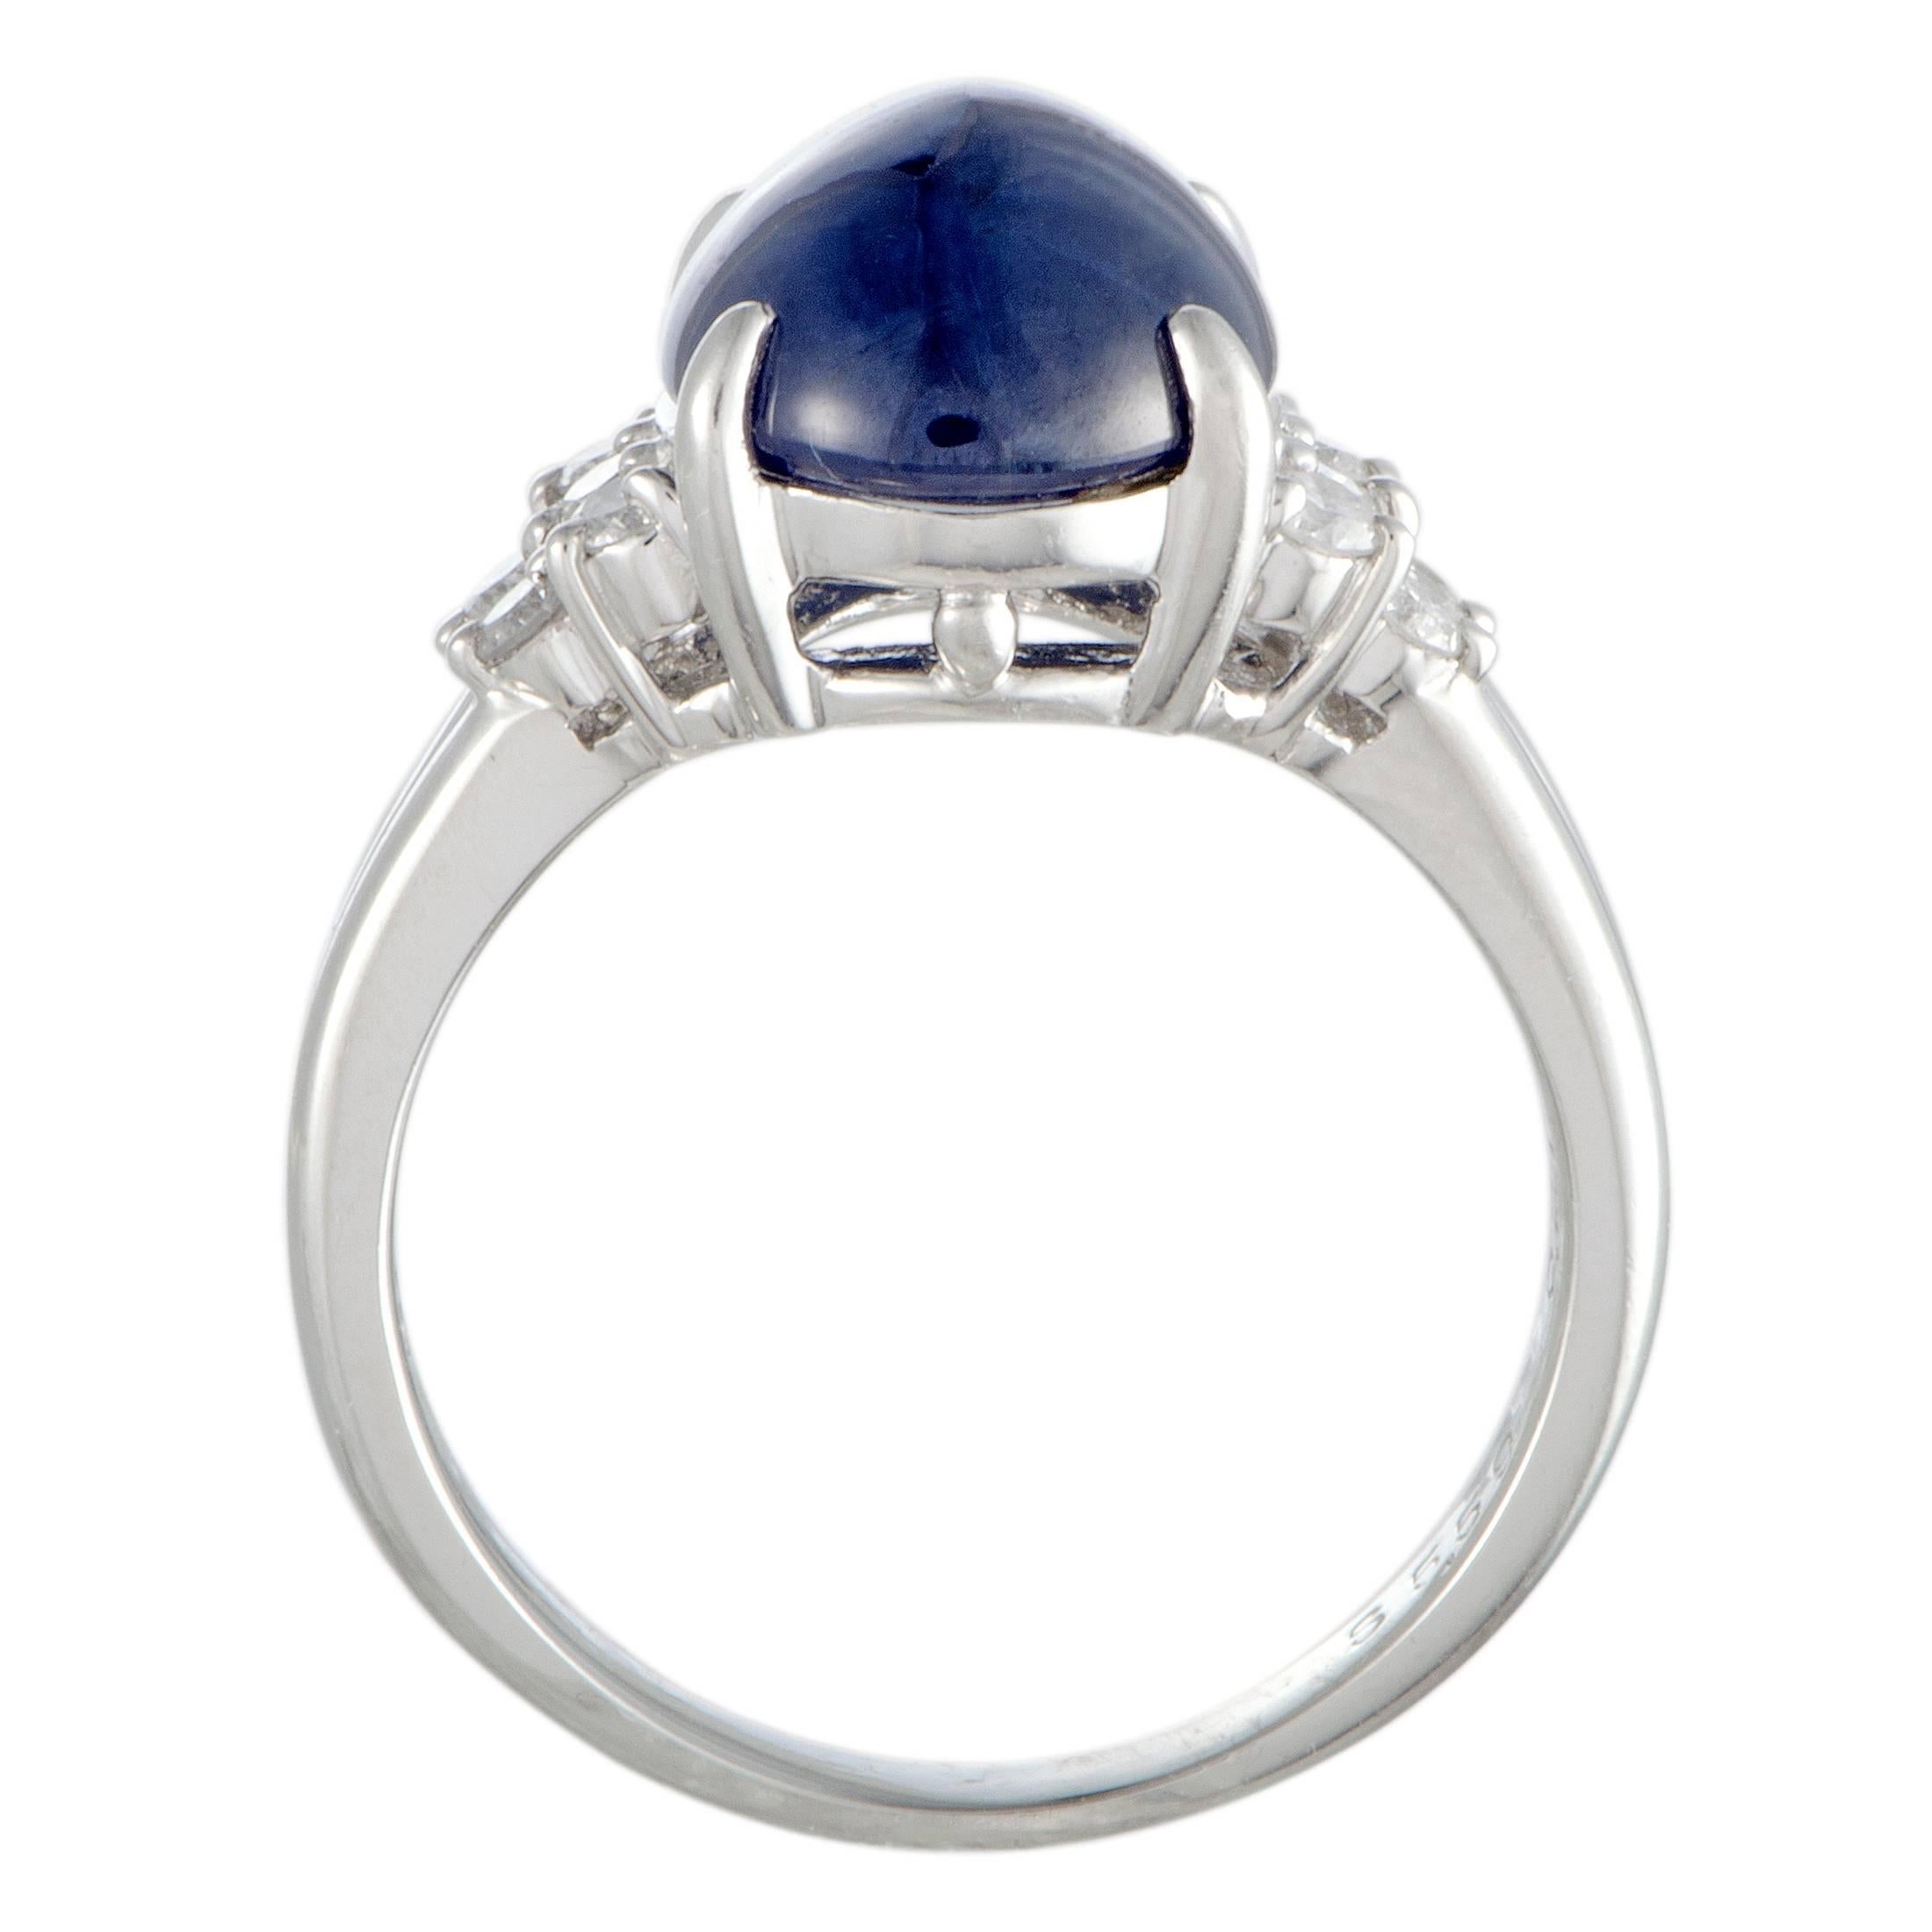 Splendidly crafted from prestigious platinum, this fabulous ring exudes elegance and refinement. The ring is set with 0.27 carats of diamonds that accentuate an eye-catching sapphire weighing 5.59 carats.
Ring Top Dimensions: 12mm x 15mm
Band: